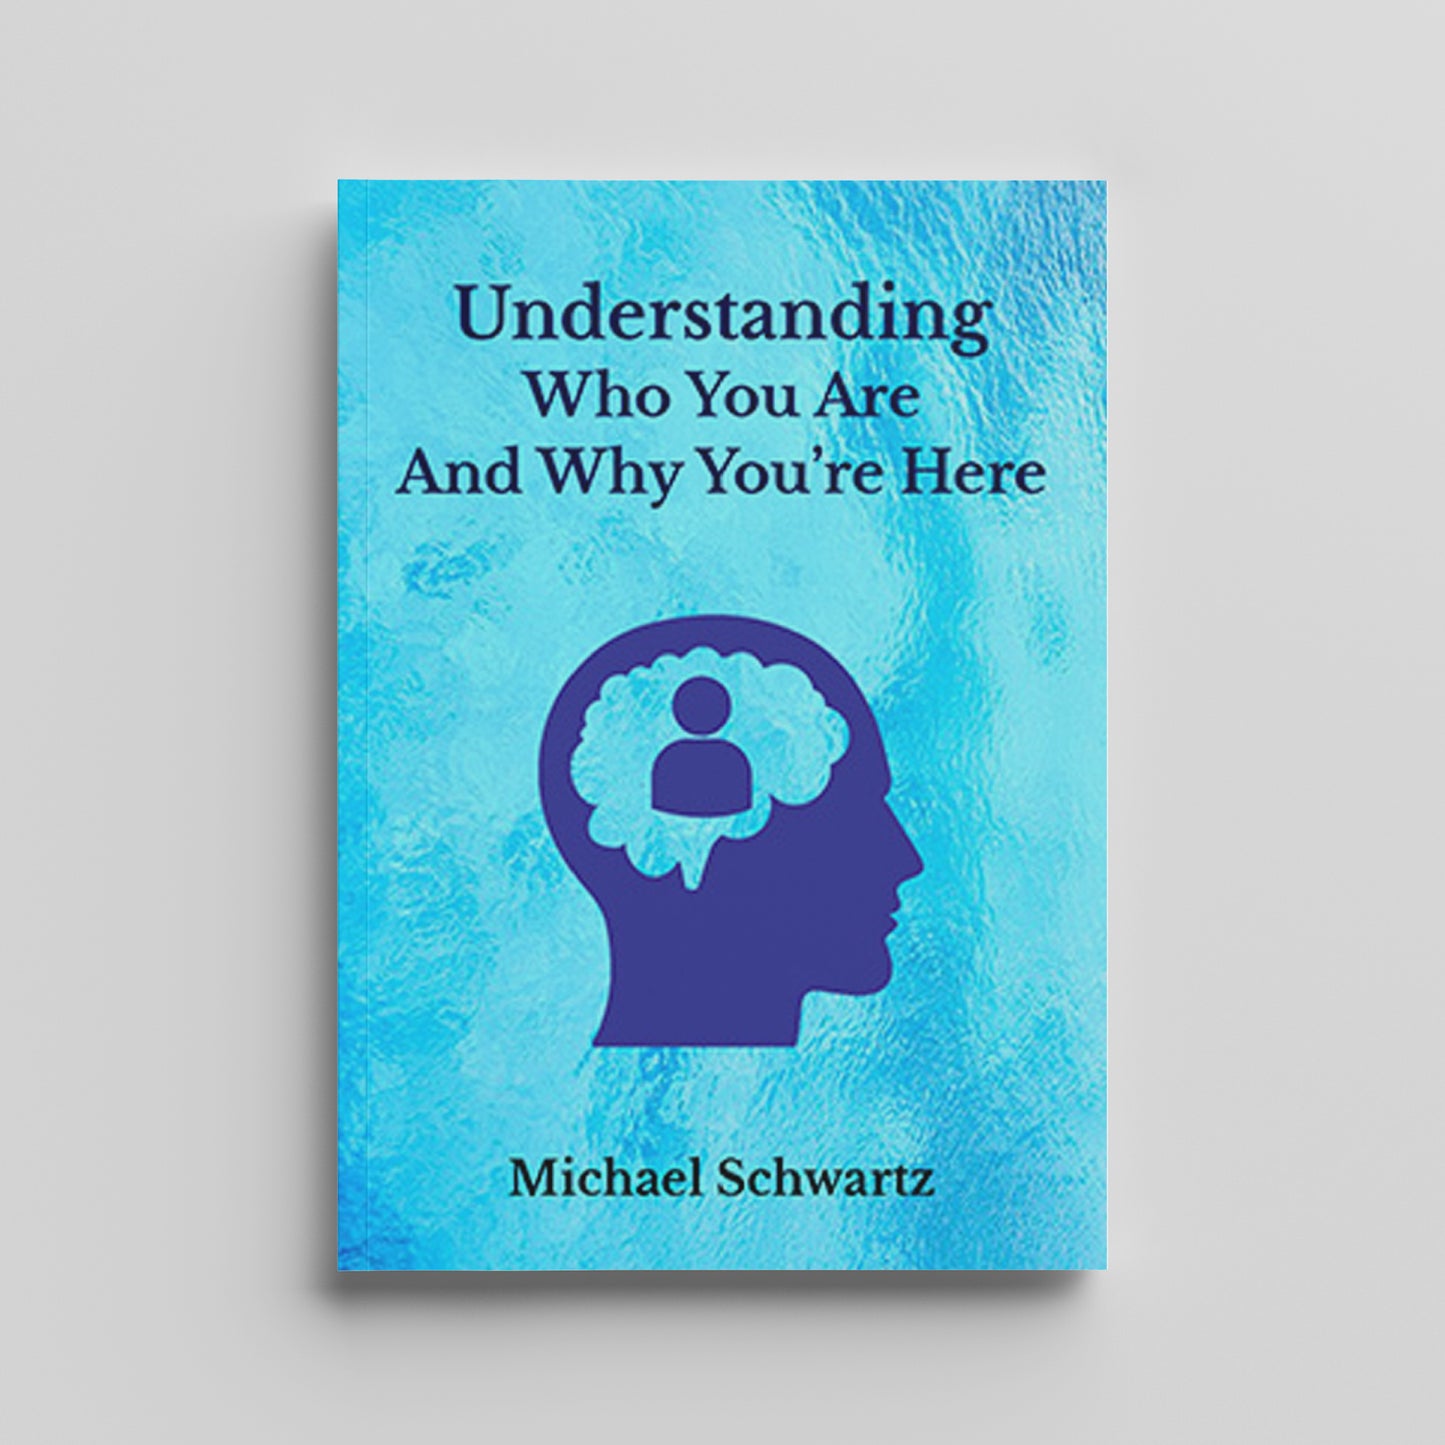 Understanding Who You Are And Why You're Here